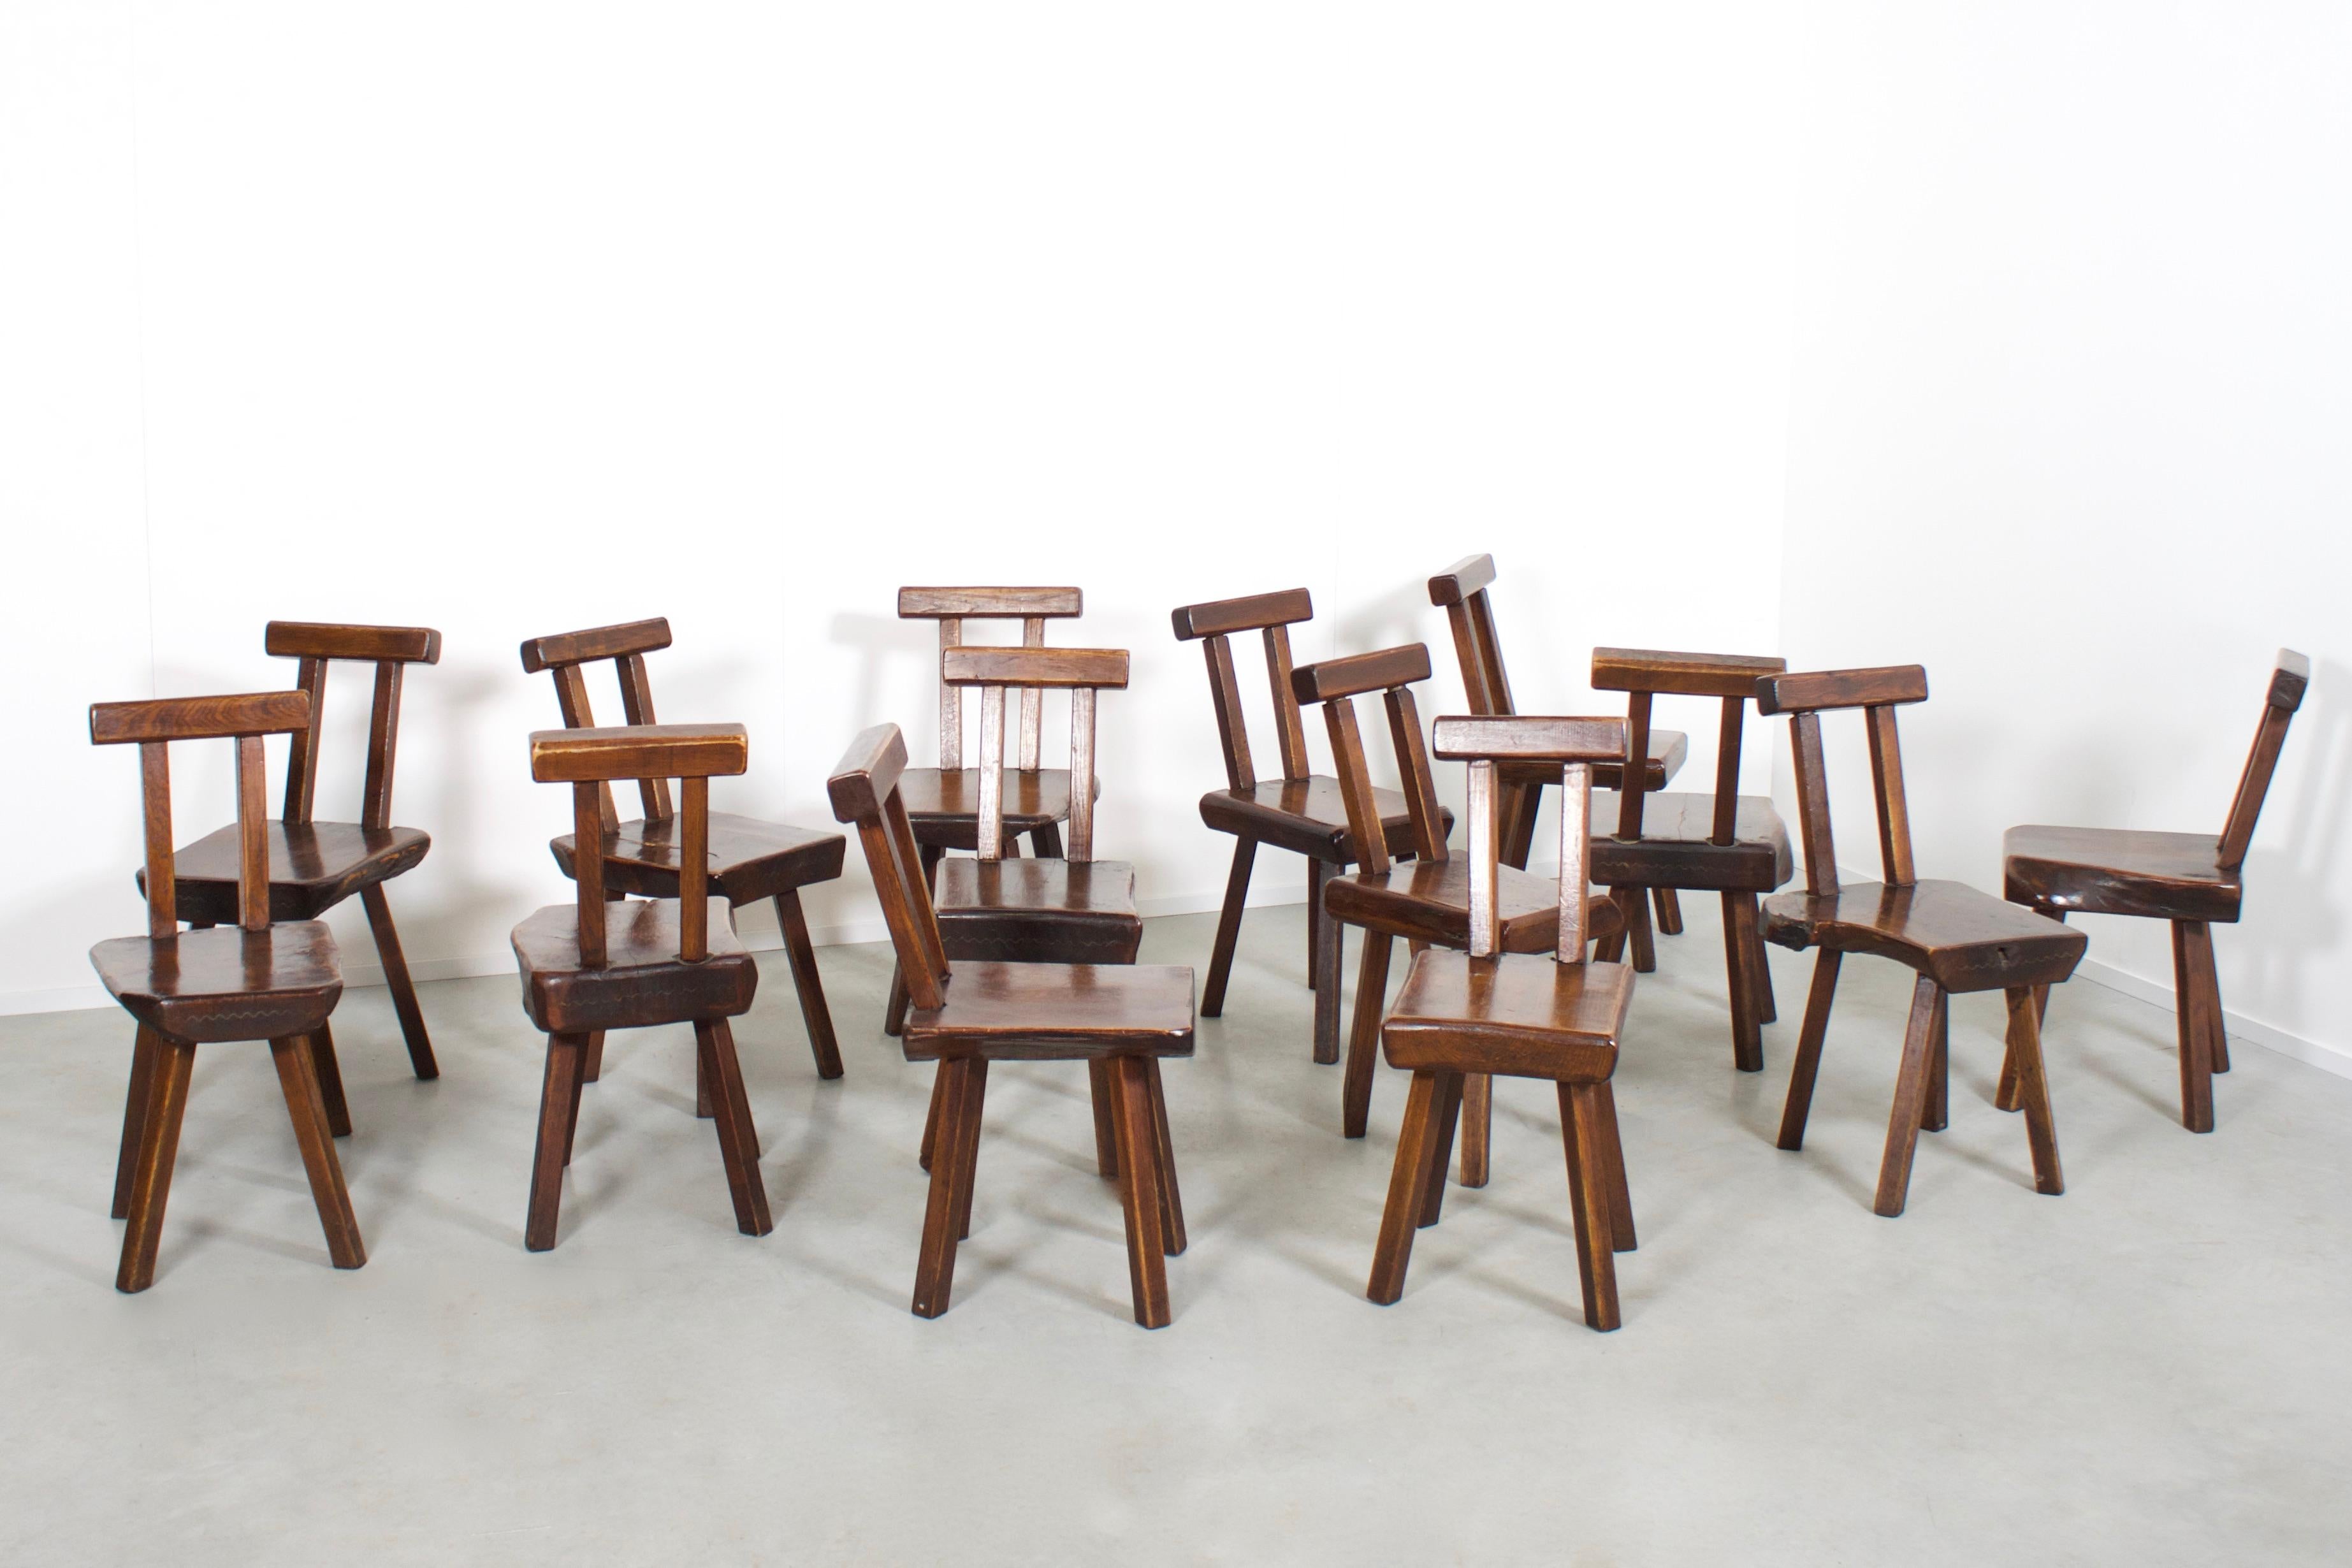 Large lot of sculptural brutalist chairs in very good condition.

These chairs are produced by Mobichalet, Belgium in the 1950s 

15 Available, price is for 1 chair

The chairs are handmade and are all slightly different in form which gives them